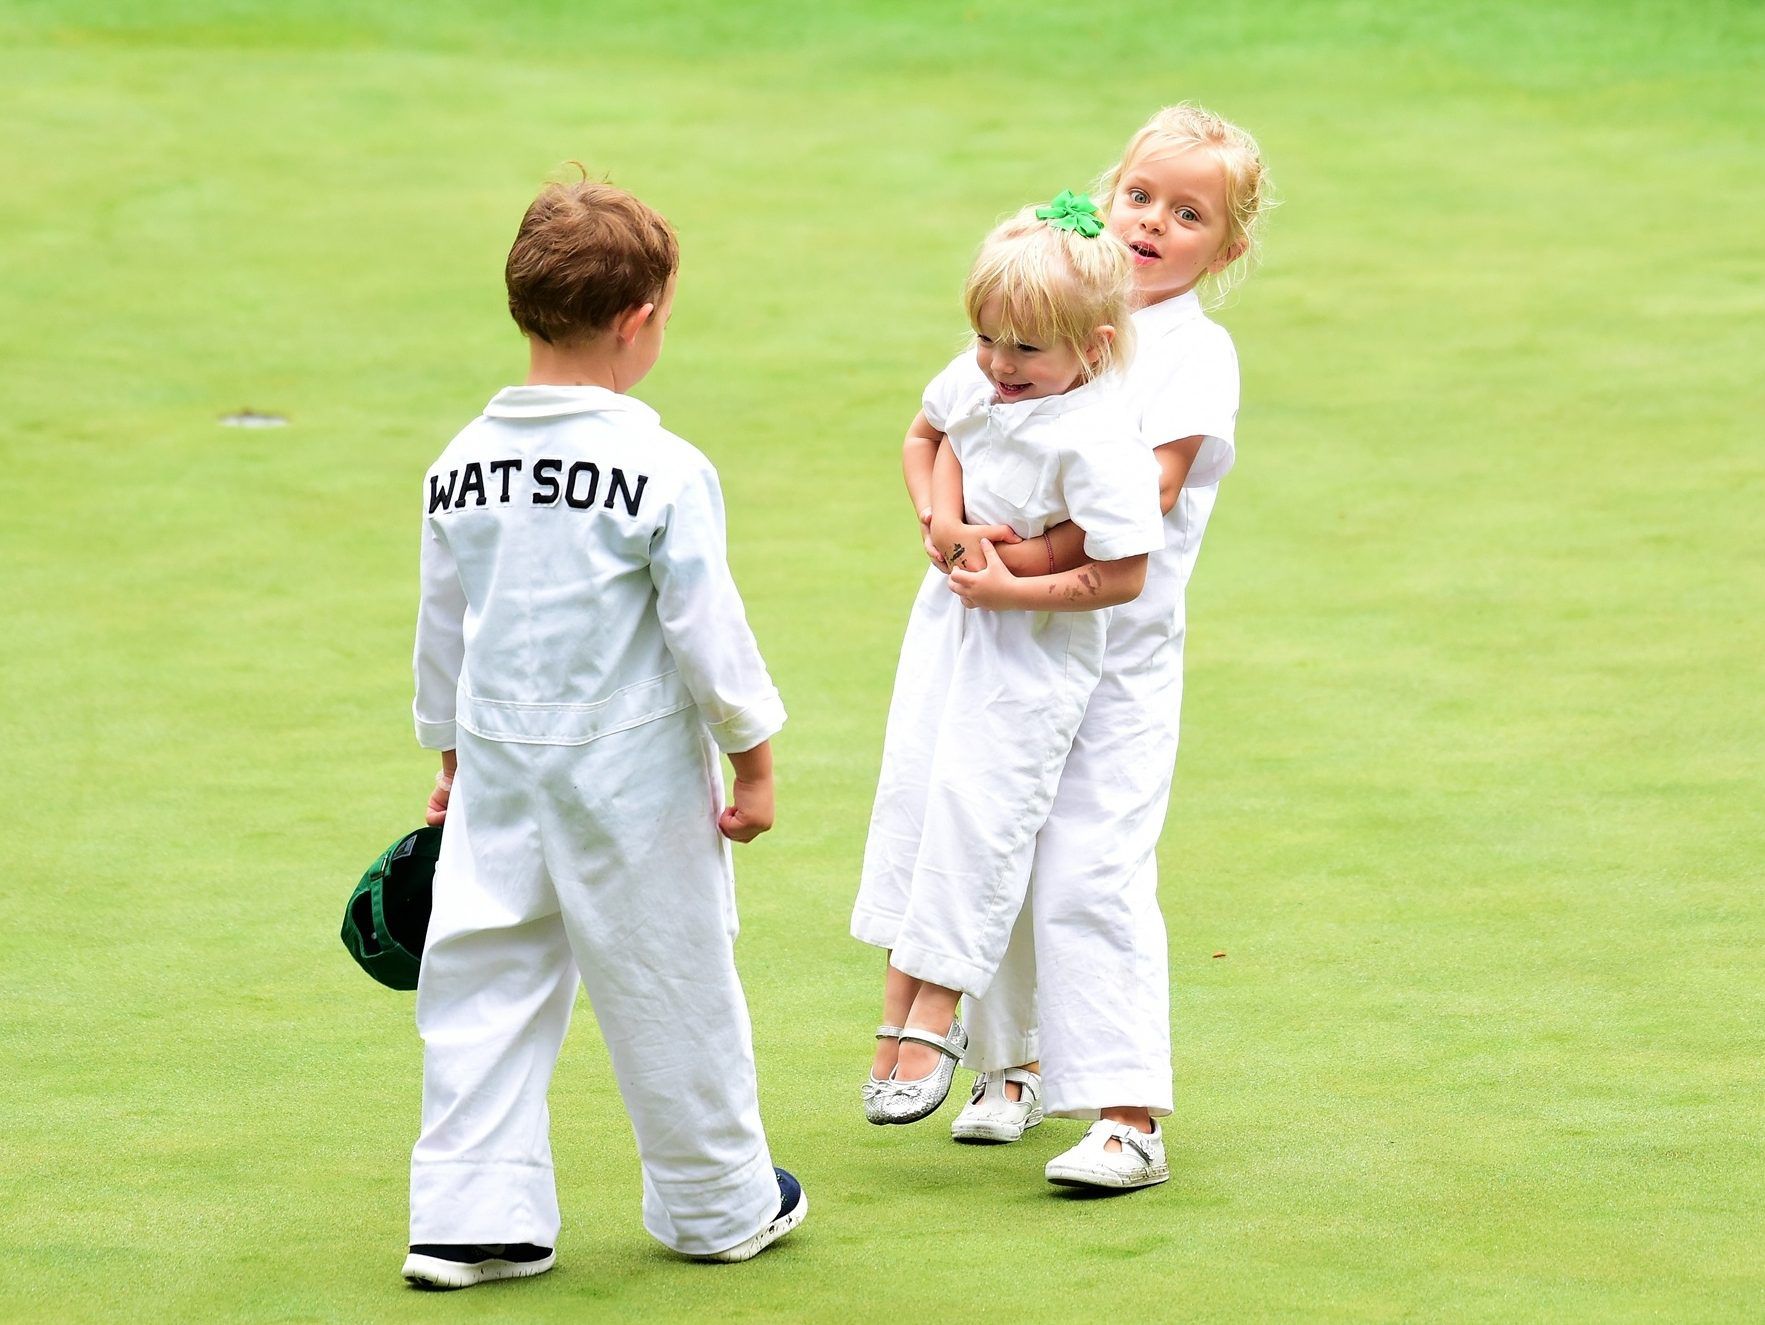 MASTERS: Golfer's 4-year-old daughter worried about stealing caddie's job